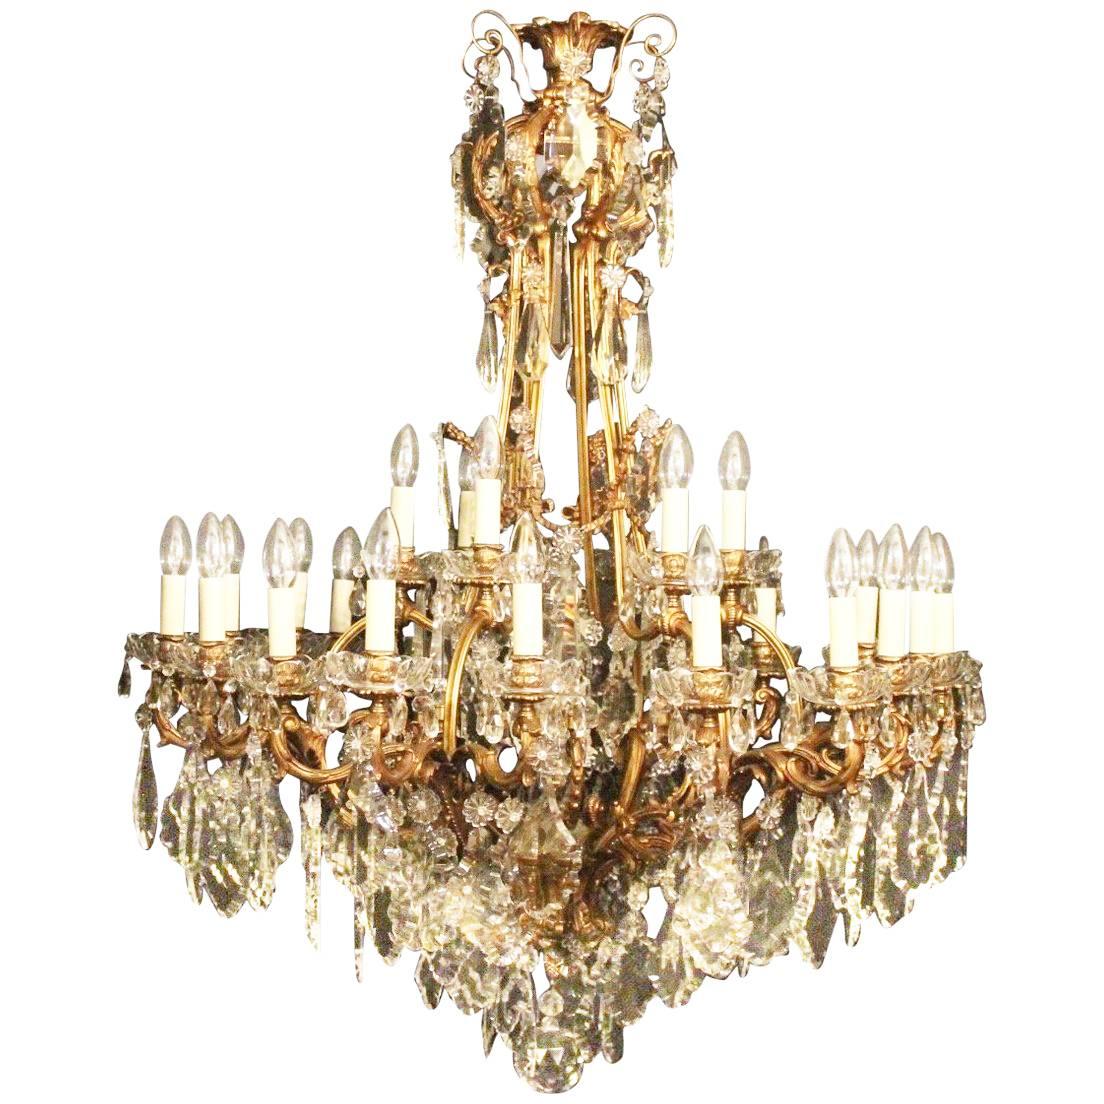 French Large Gilded Bronze and Crystal Twenty-Four-Light Antique Chandelier For Sale